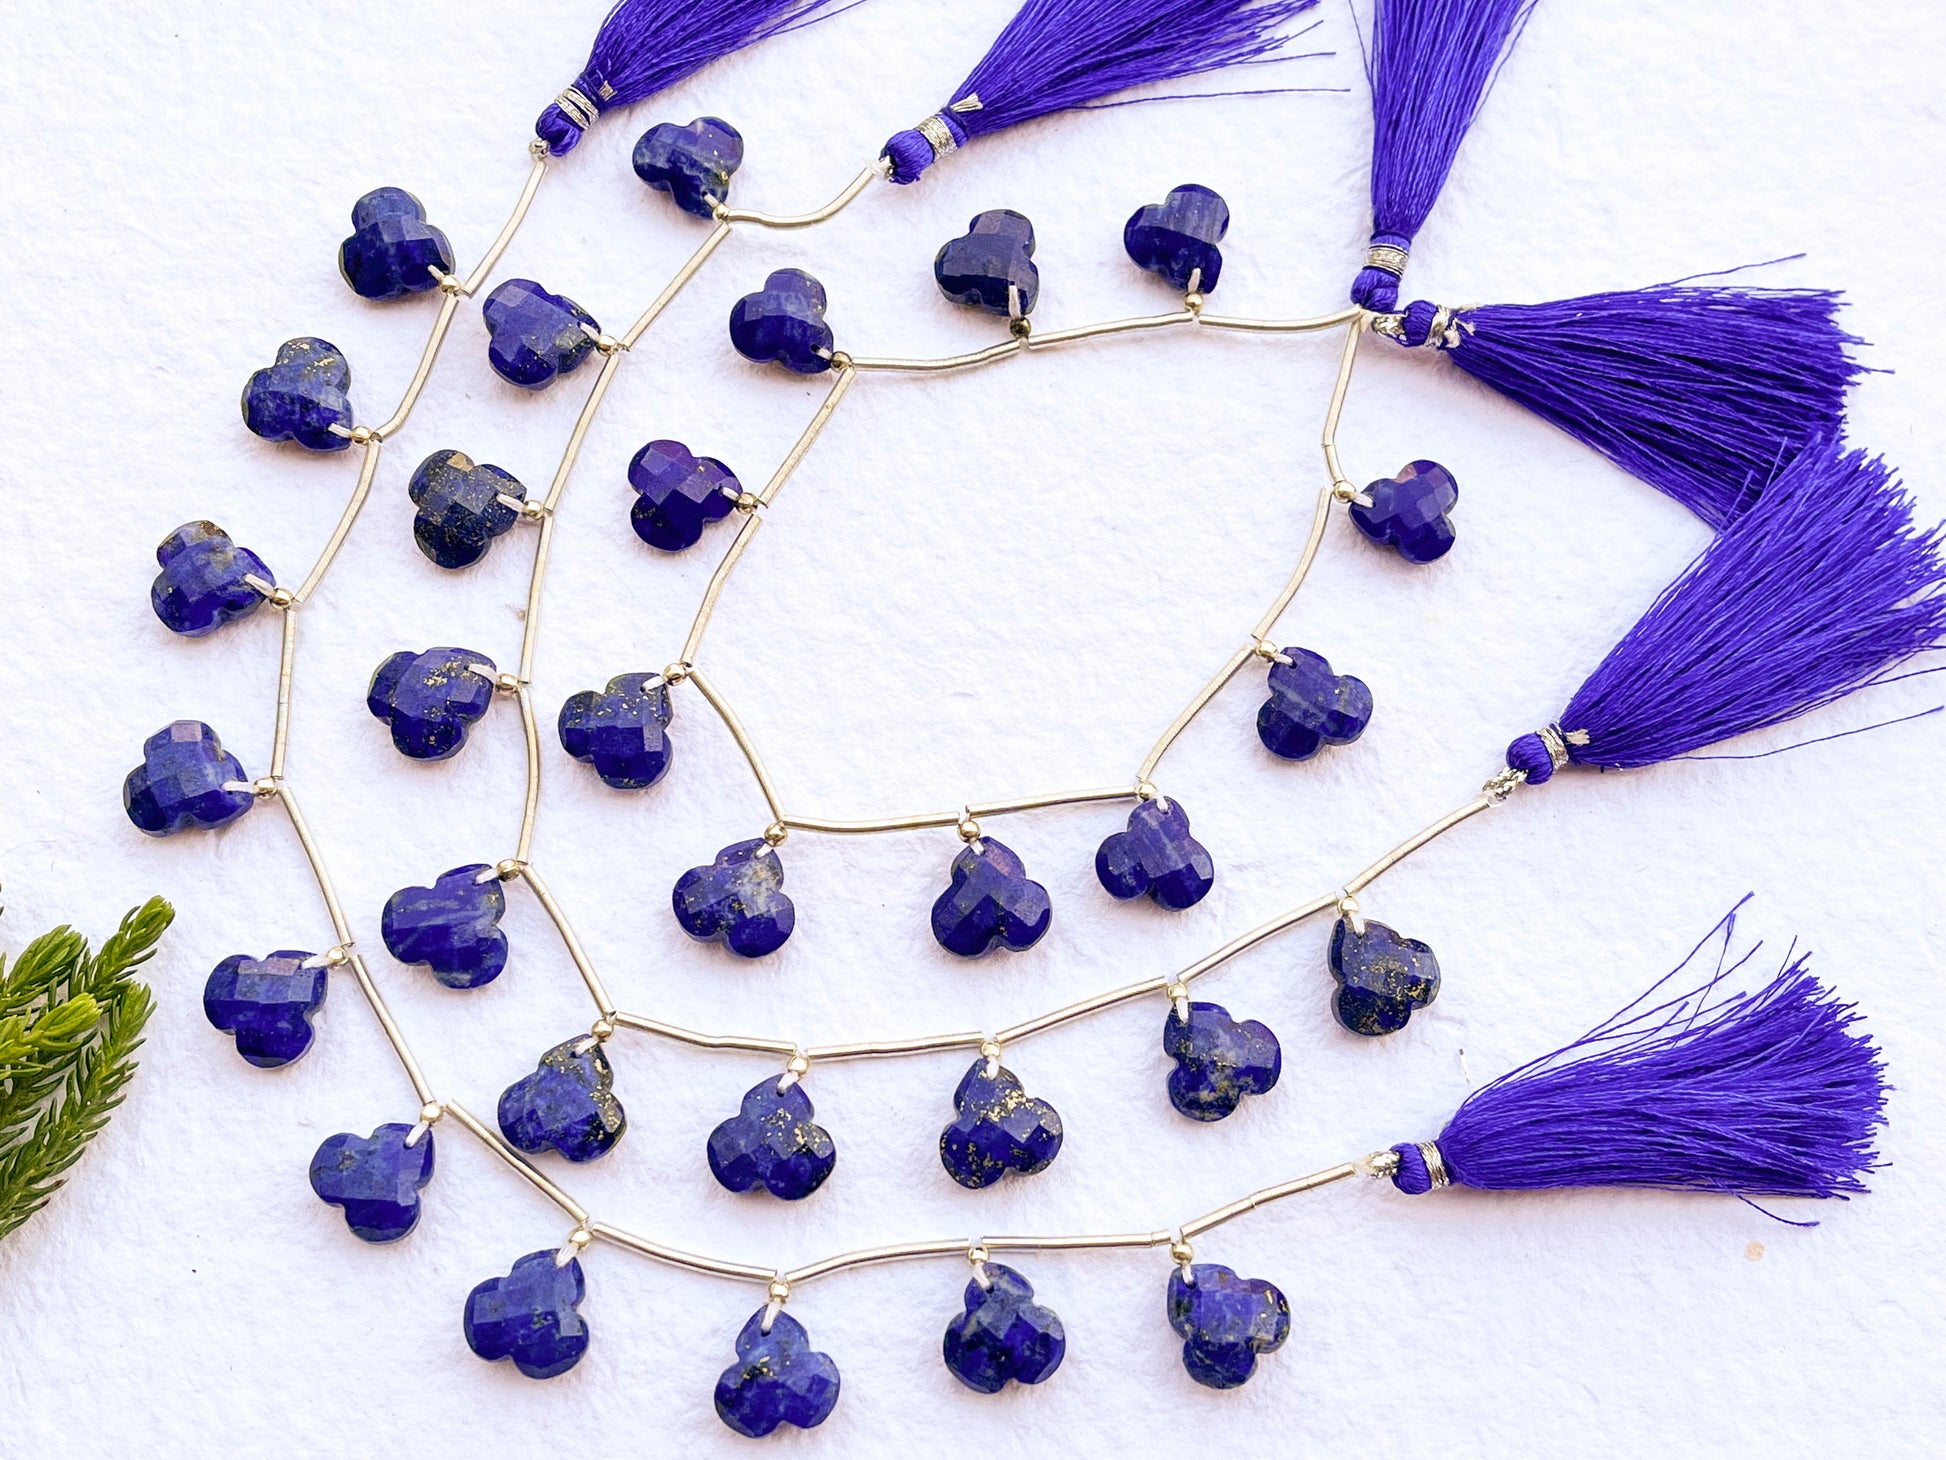 Lapis Lazuli Trio Flower Shape Faceted Beads Beadsforyourjewelry